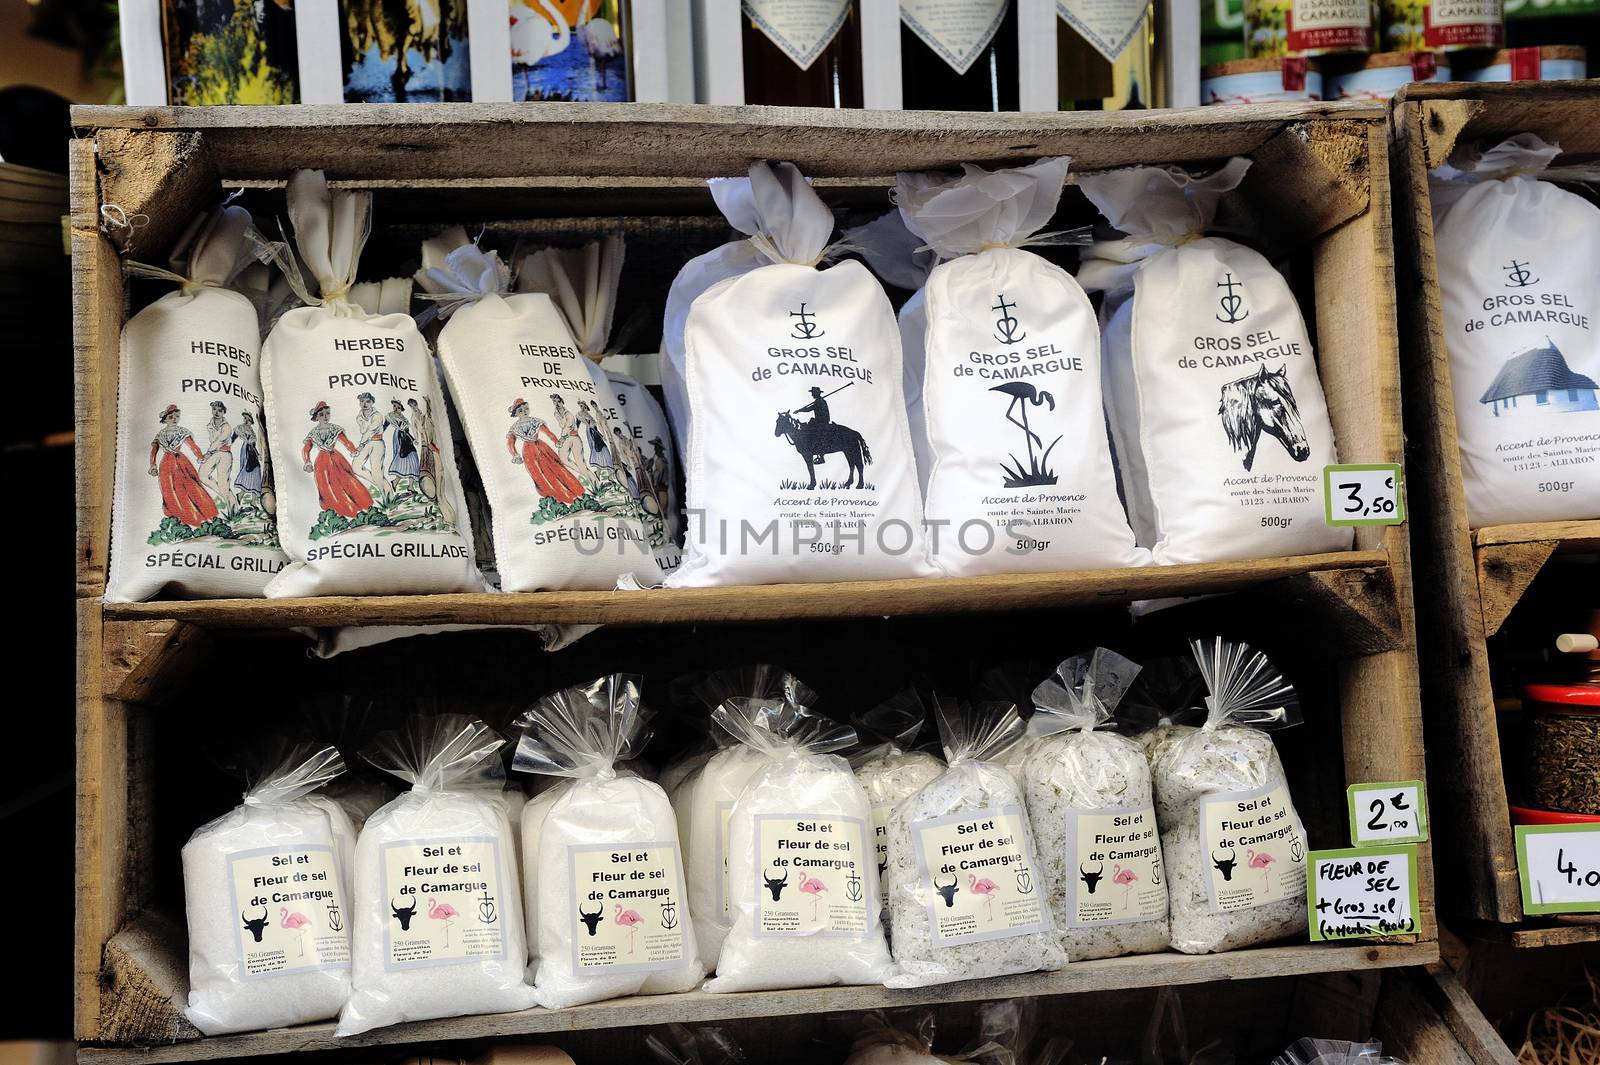 Bags of salt produced in the Camargue in Aigues-Mortes, here sold in a shop of Saintes-Maries-de-la-Mer in memory of the area for tourists.